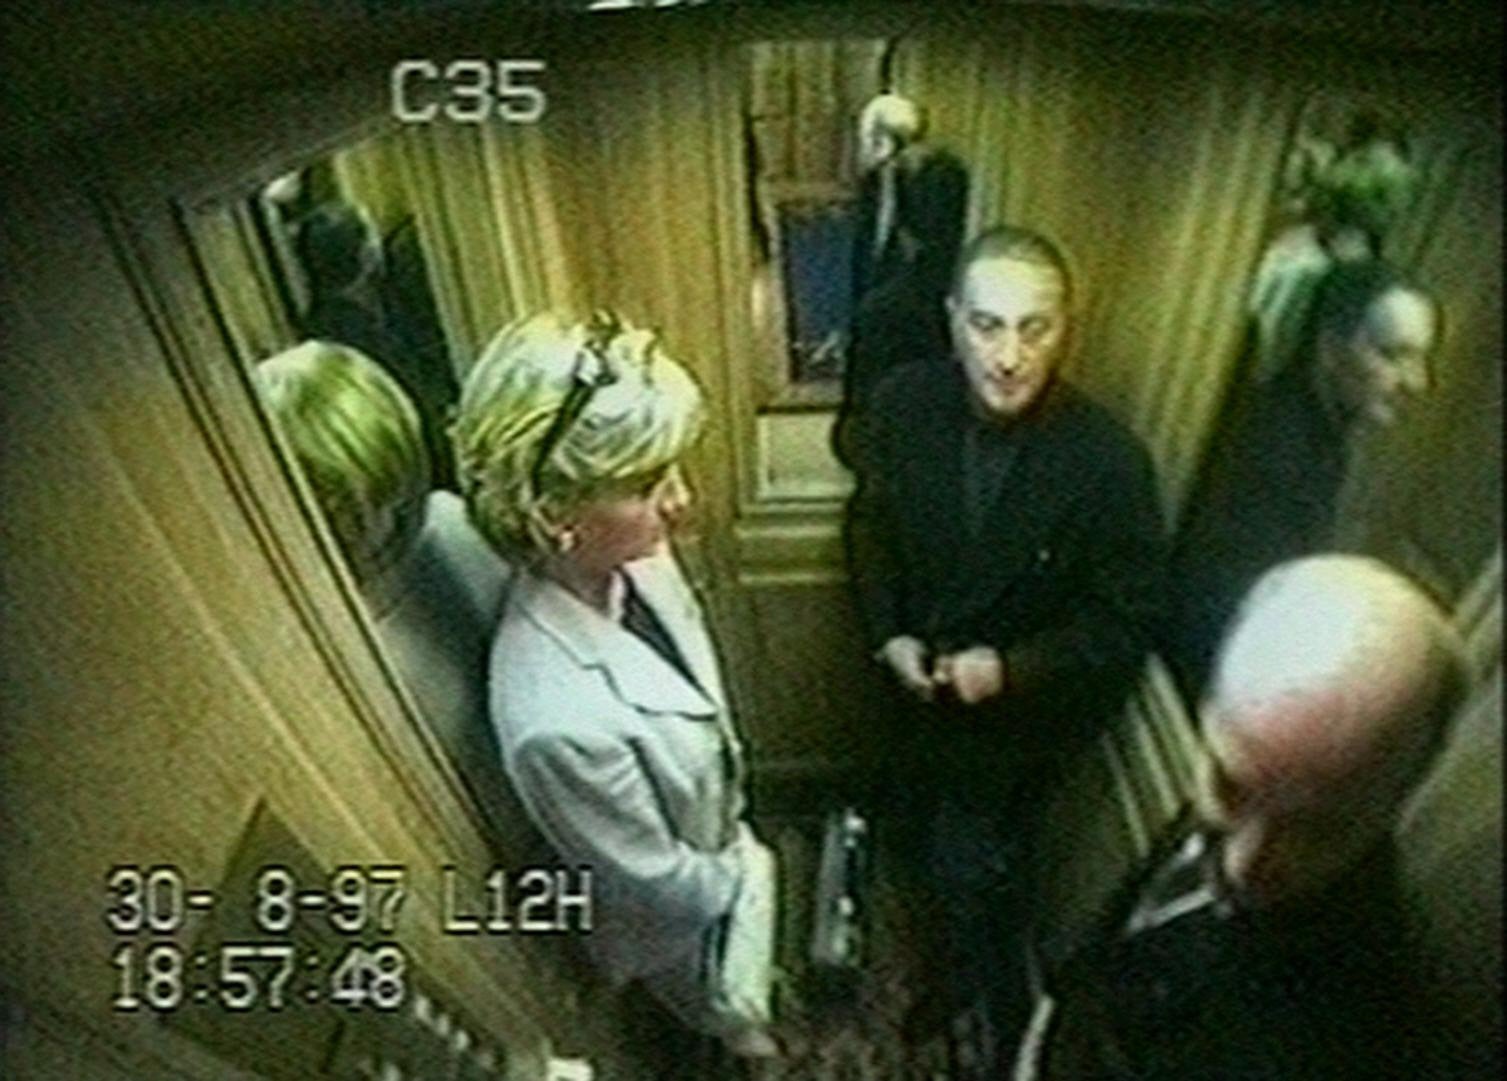 CCTV footage of Diana and Dodi – one of the last pictures of them before their fatal car crash